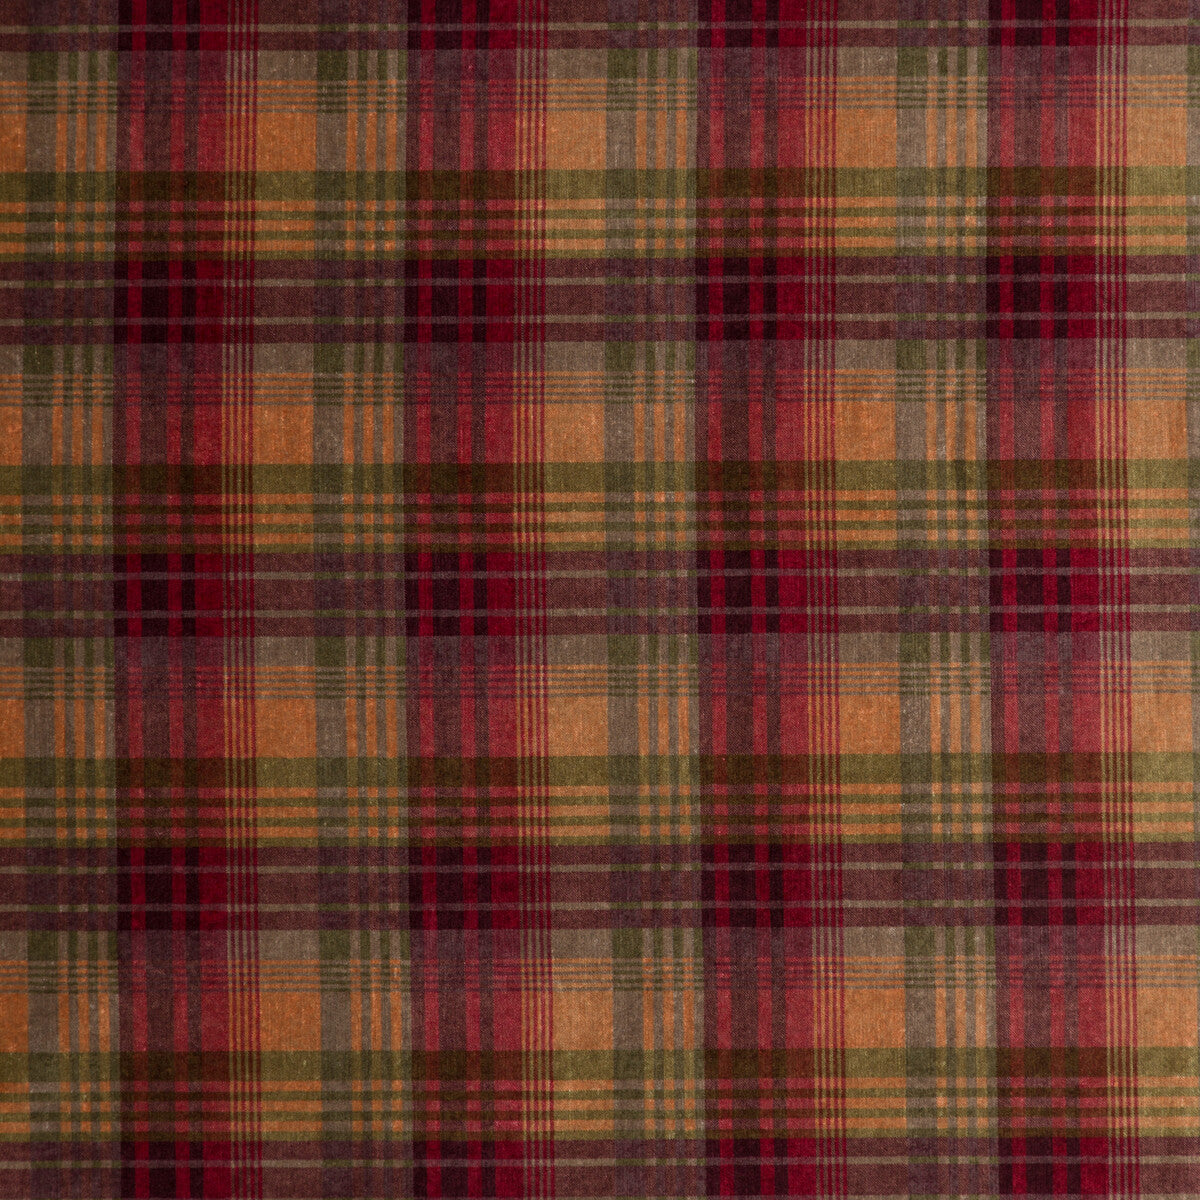 Velvet Ancient Tartan fabric in plum color - pattern FD274.H113.0 - by Mulberry in the Bohemian Weaves collection